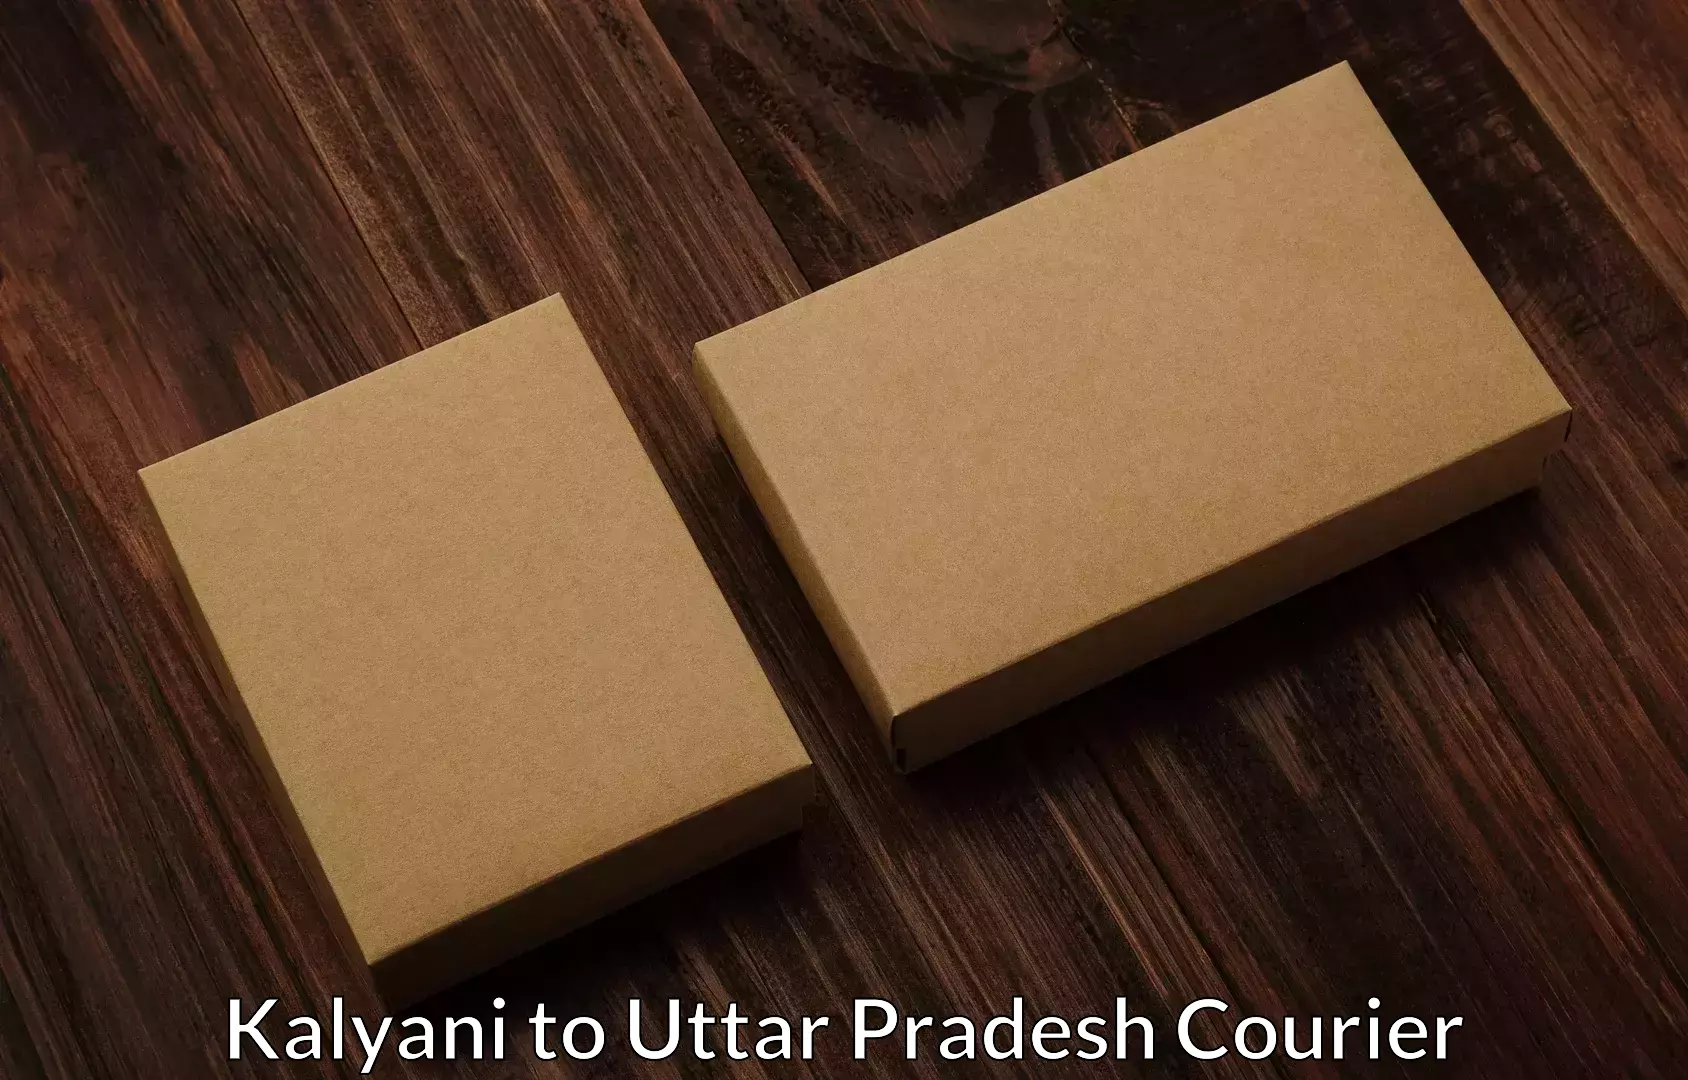 Professional moving company Kalyani to Sultanpur Avadh